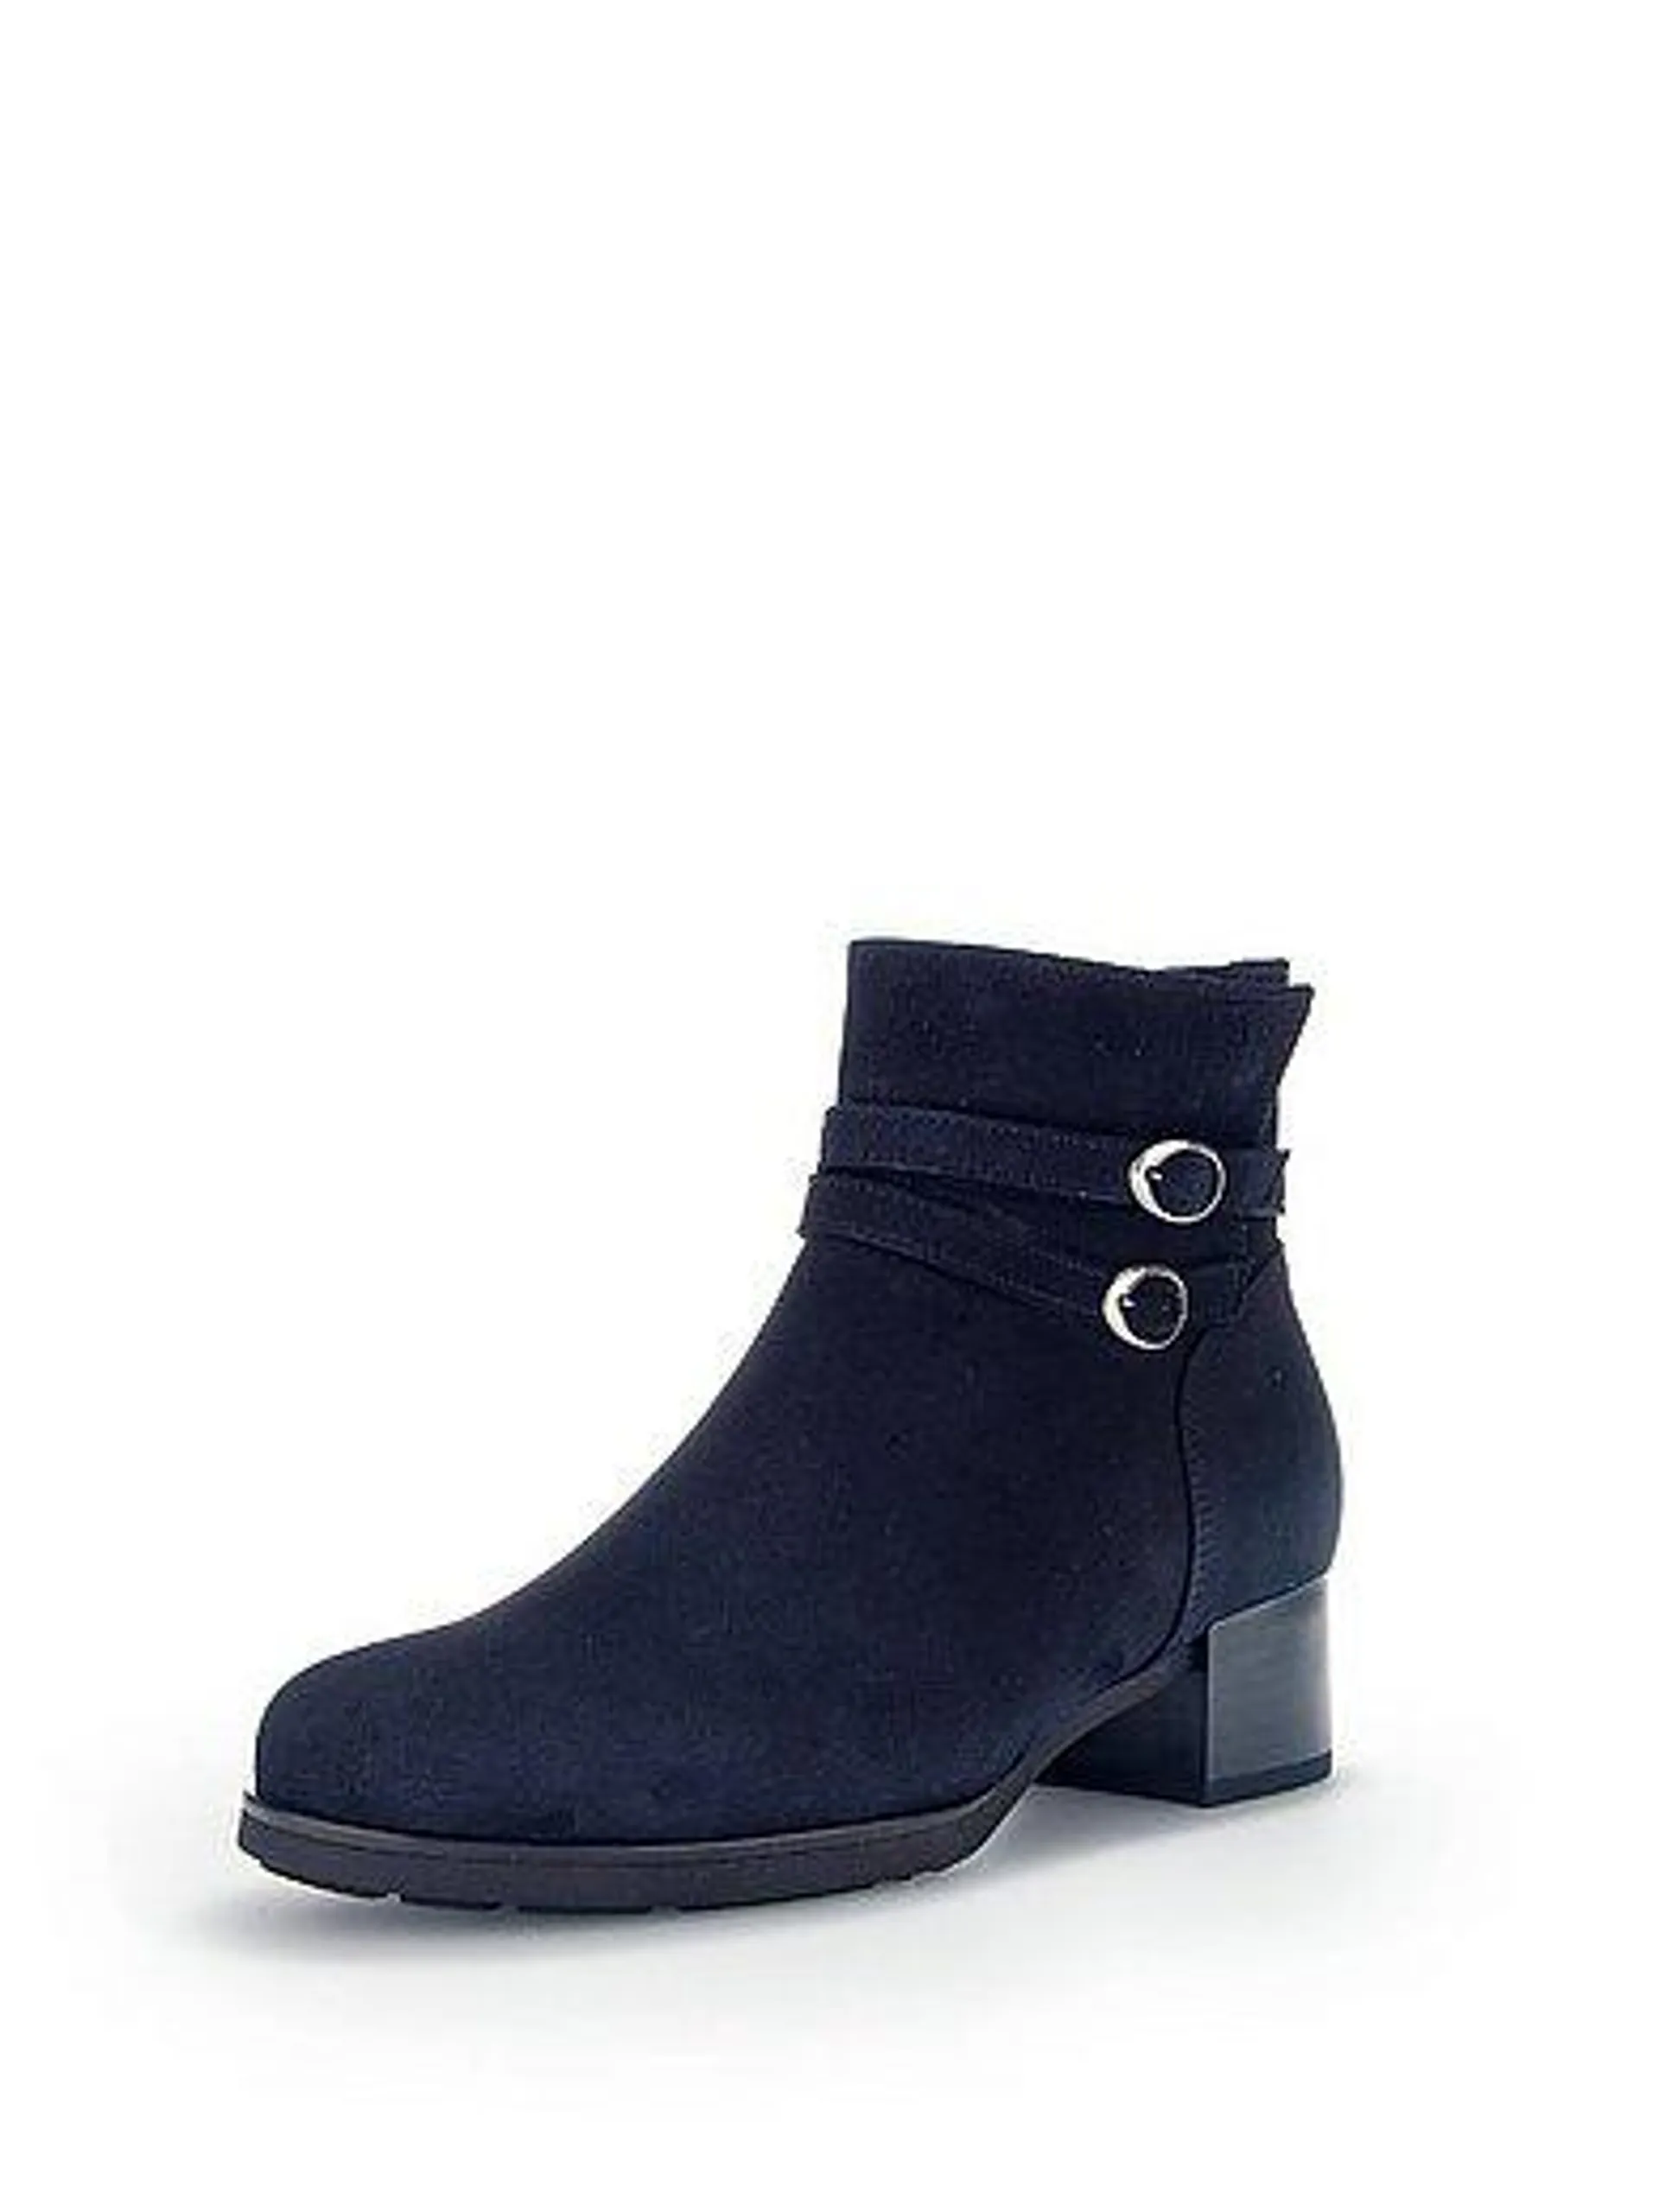 Ankle boots with zip